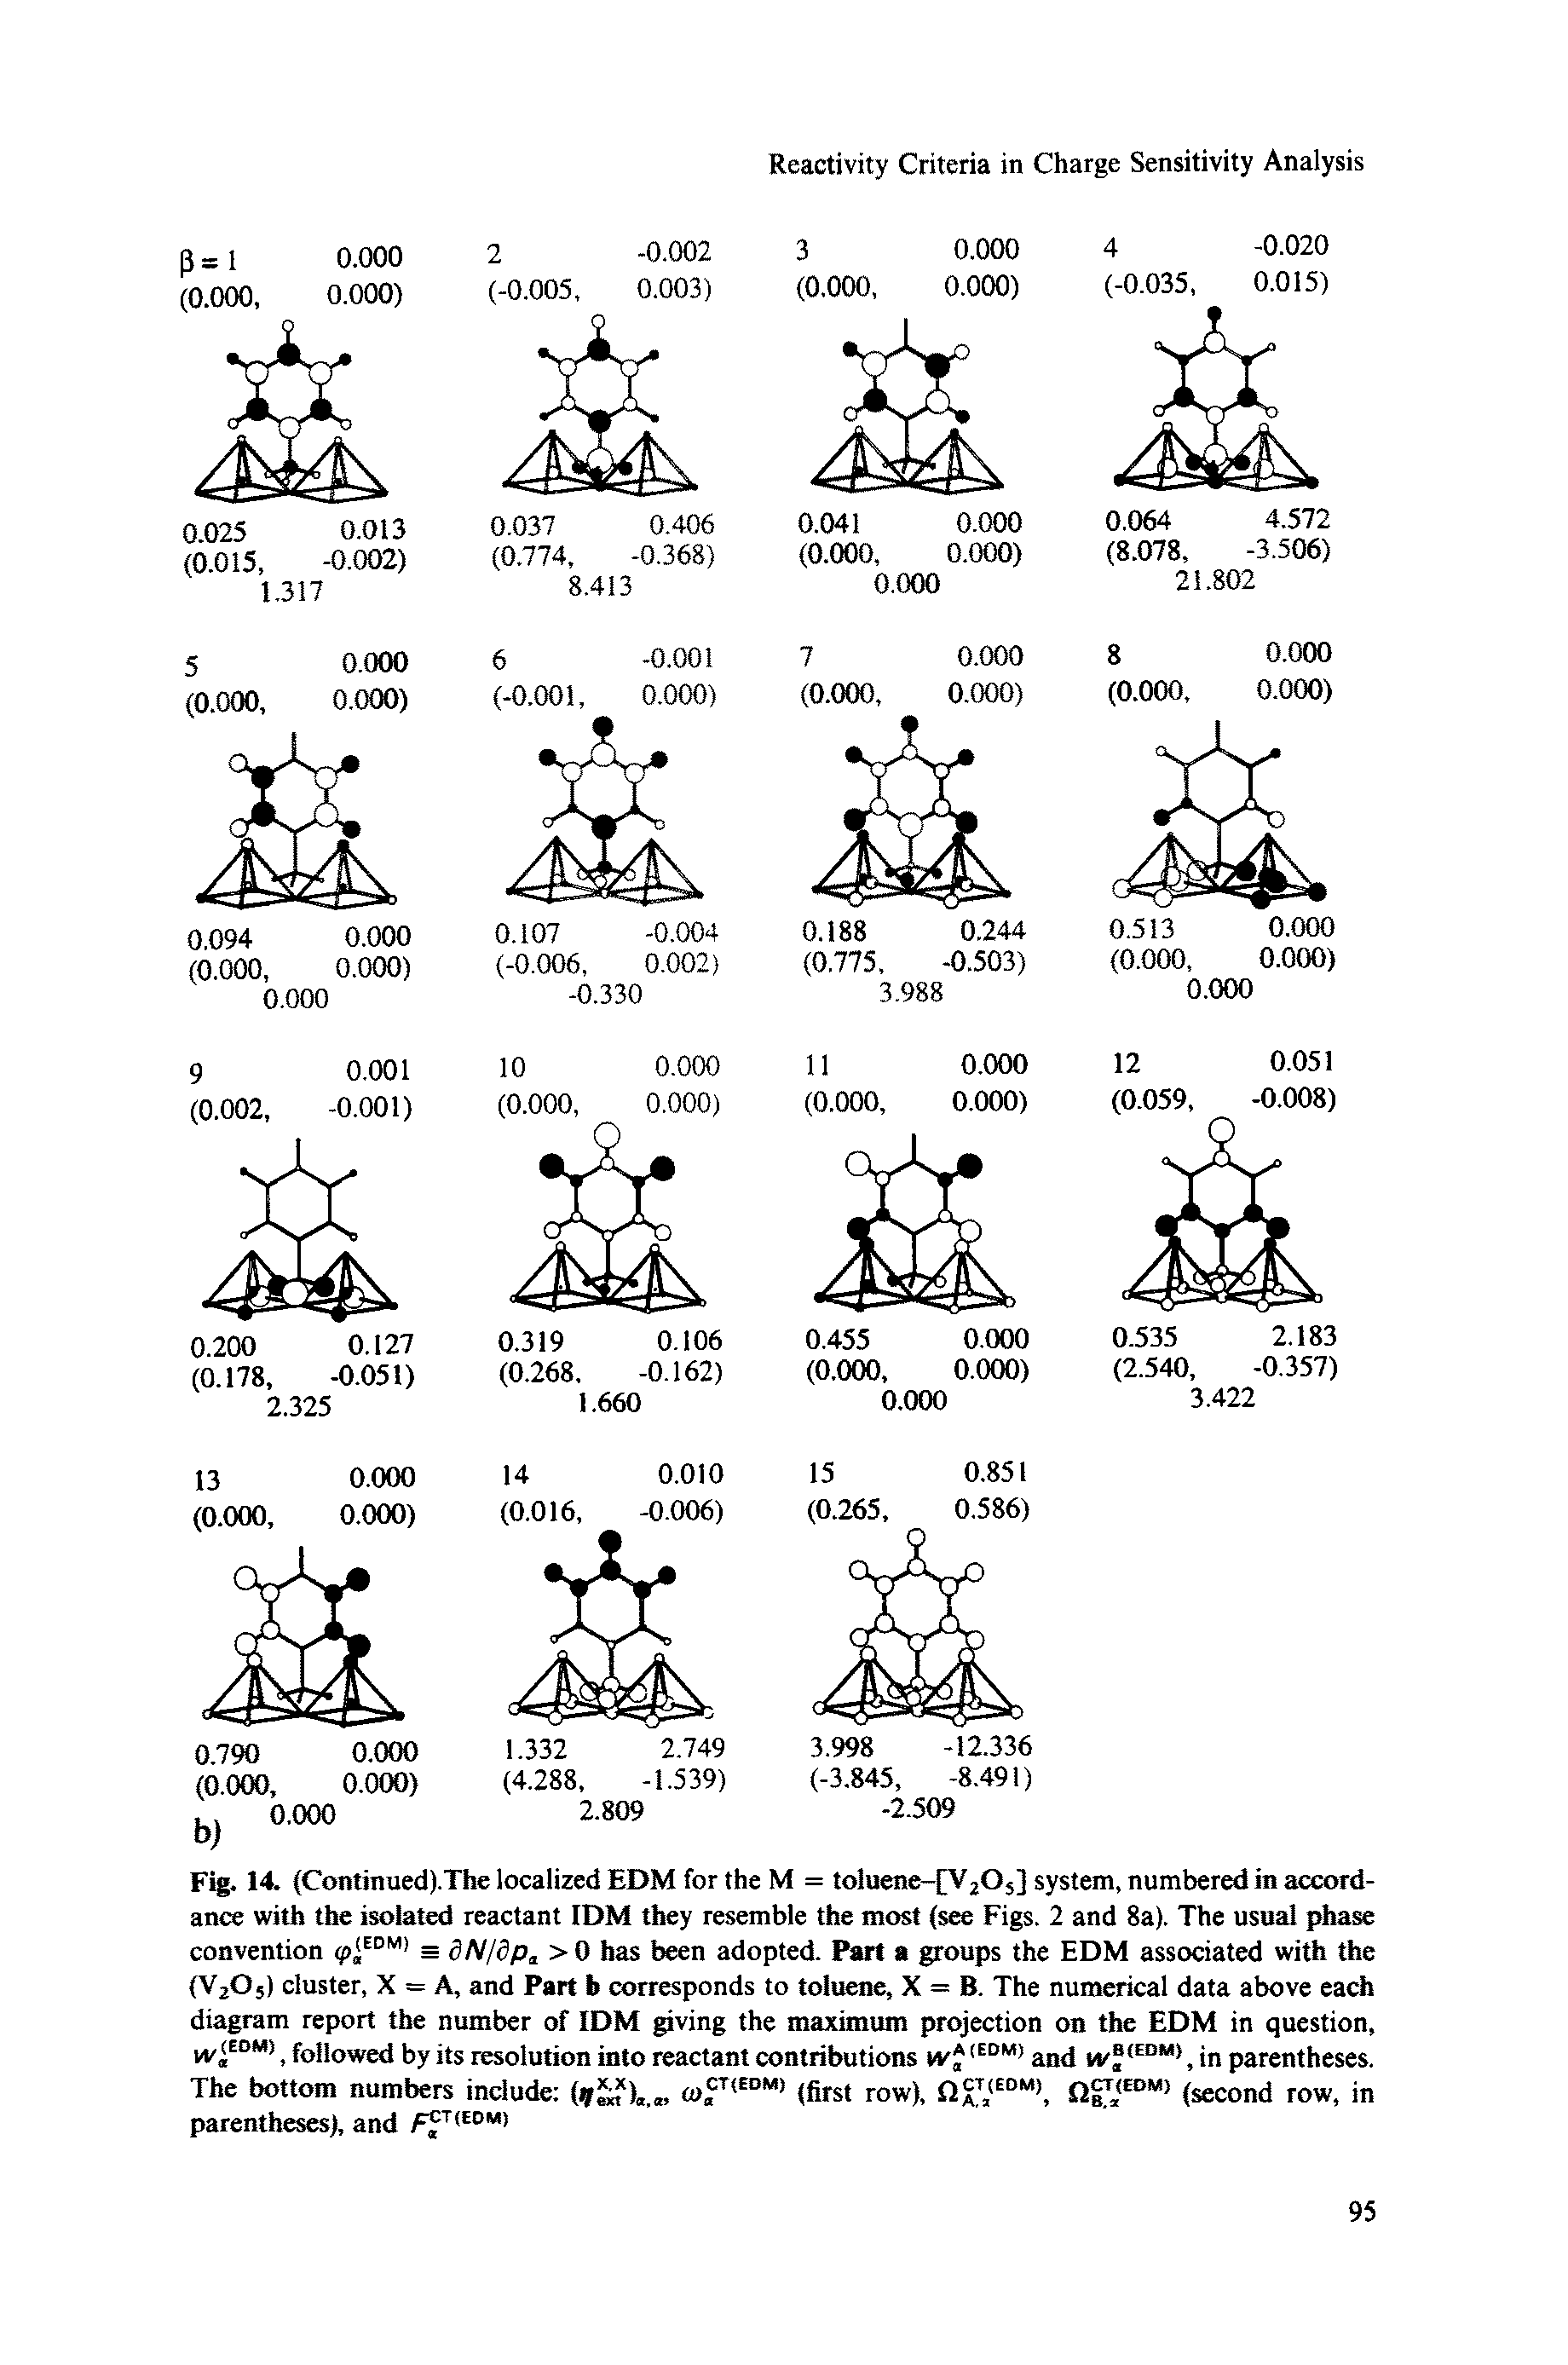 Fig. 14. (Continued).The localized EDM for the M = toluene-[V205] system, numbered in accordance with the isolated reactant IDM they resemble the most (see Figs. 2 and 8a). The usual phase convention (pjEDM = dN/dpa > 0 has been adopted. Part a groups the EDM associated with the (V2Os) cluster, X = A, and Part b corresponds to toluene, X = B. The numerical data above each diagram report the number of IDM giving the maximum projection on the EDM in question, M iE0M), followed by its resolution into reactant contributions w (EDM) and w (EDM), in parentheses. The bottom numbers include t ).,., w.CT<EDM) (first row), a T,<EDM>, ngTjEDM) (second row, in parentheses), and fJT(EDM)...